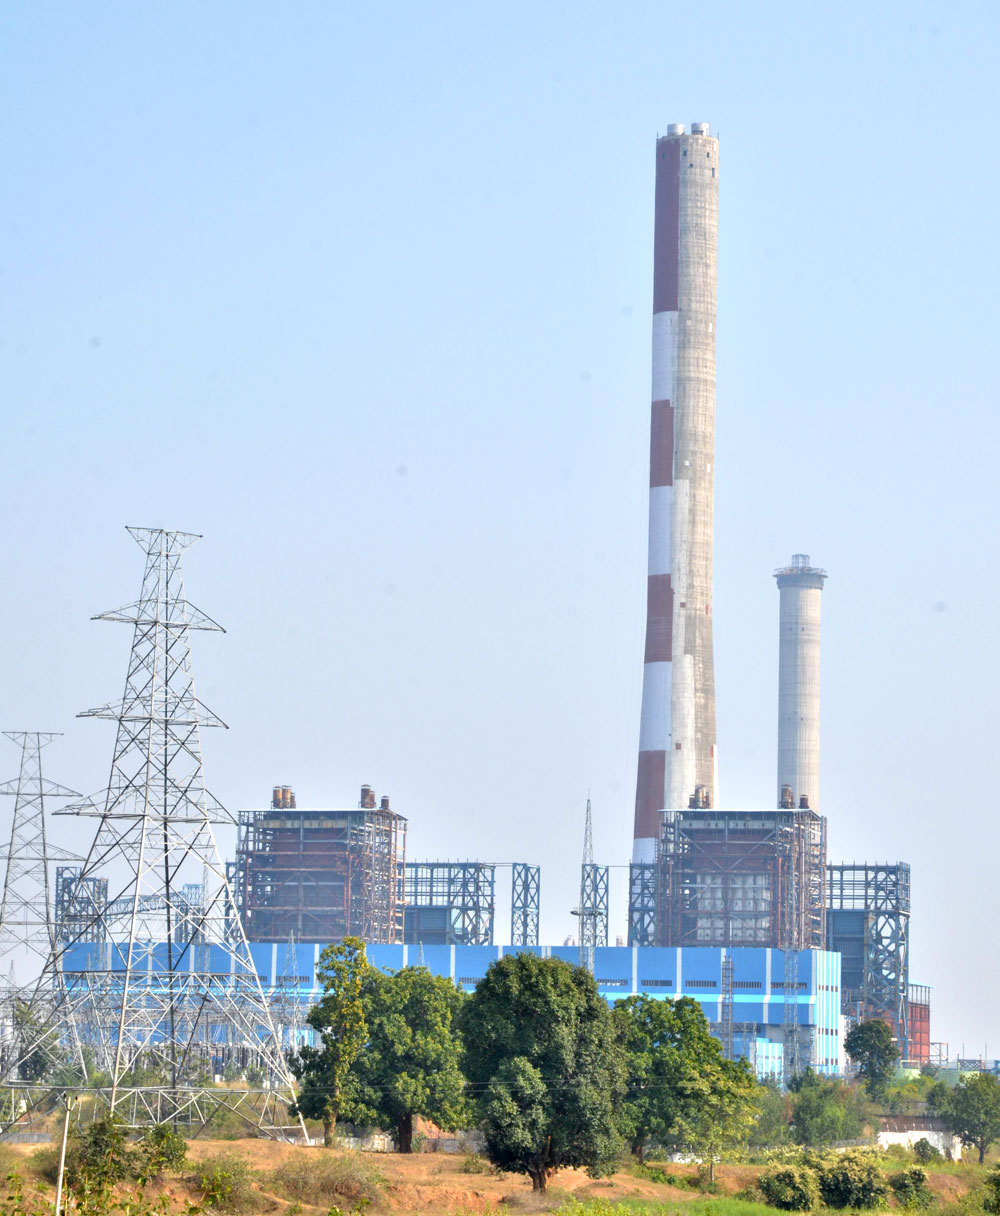 The government had launched a pilot scheme to procure 2,500MW for three years under a medium-term arrangement from commissioned power plants without power purchase agreements earlier this year in April